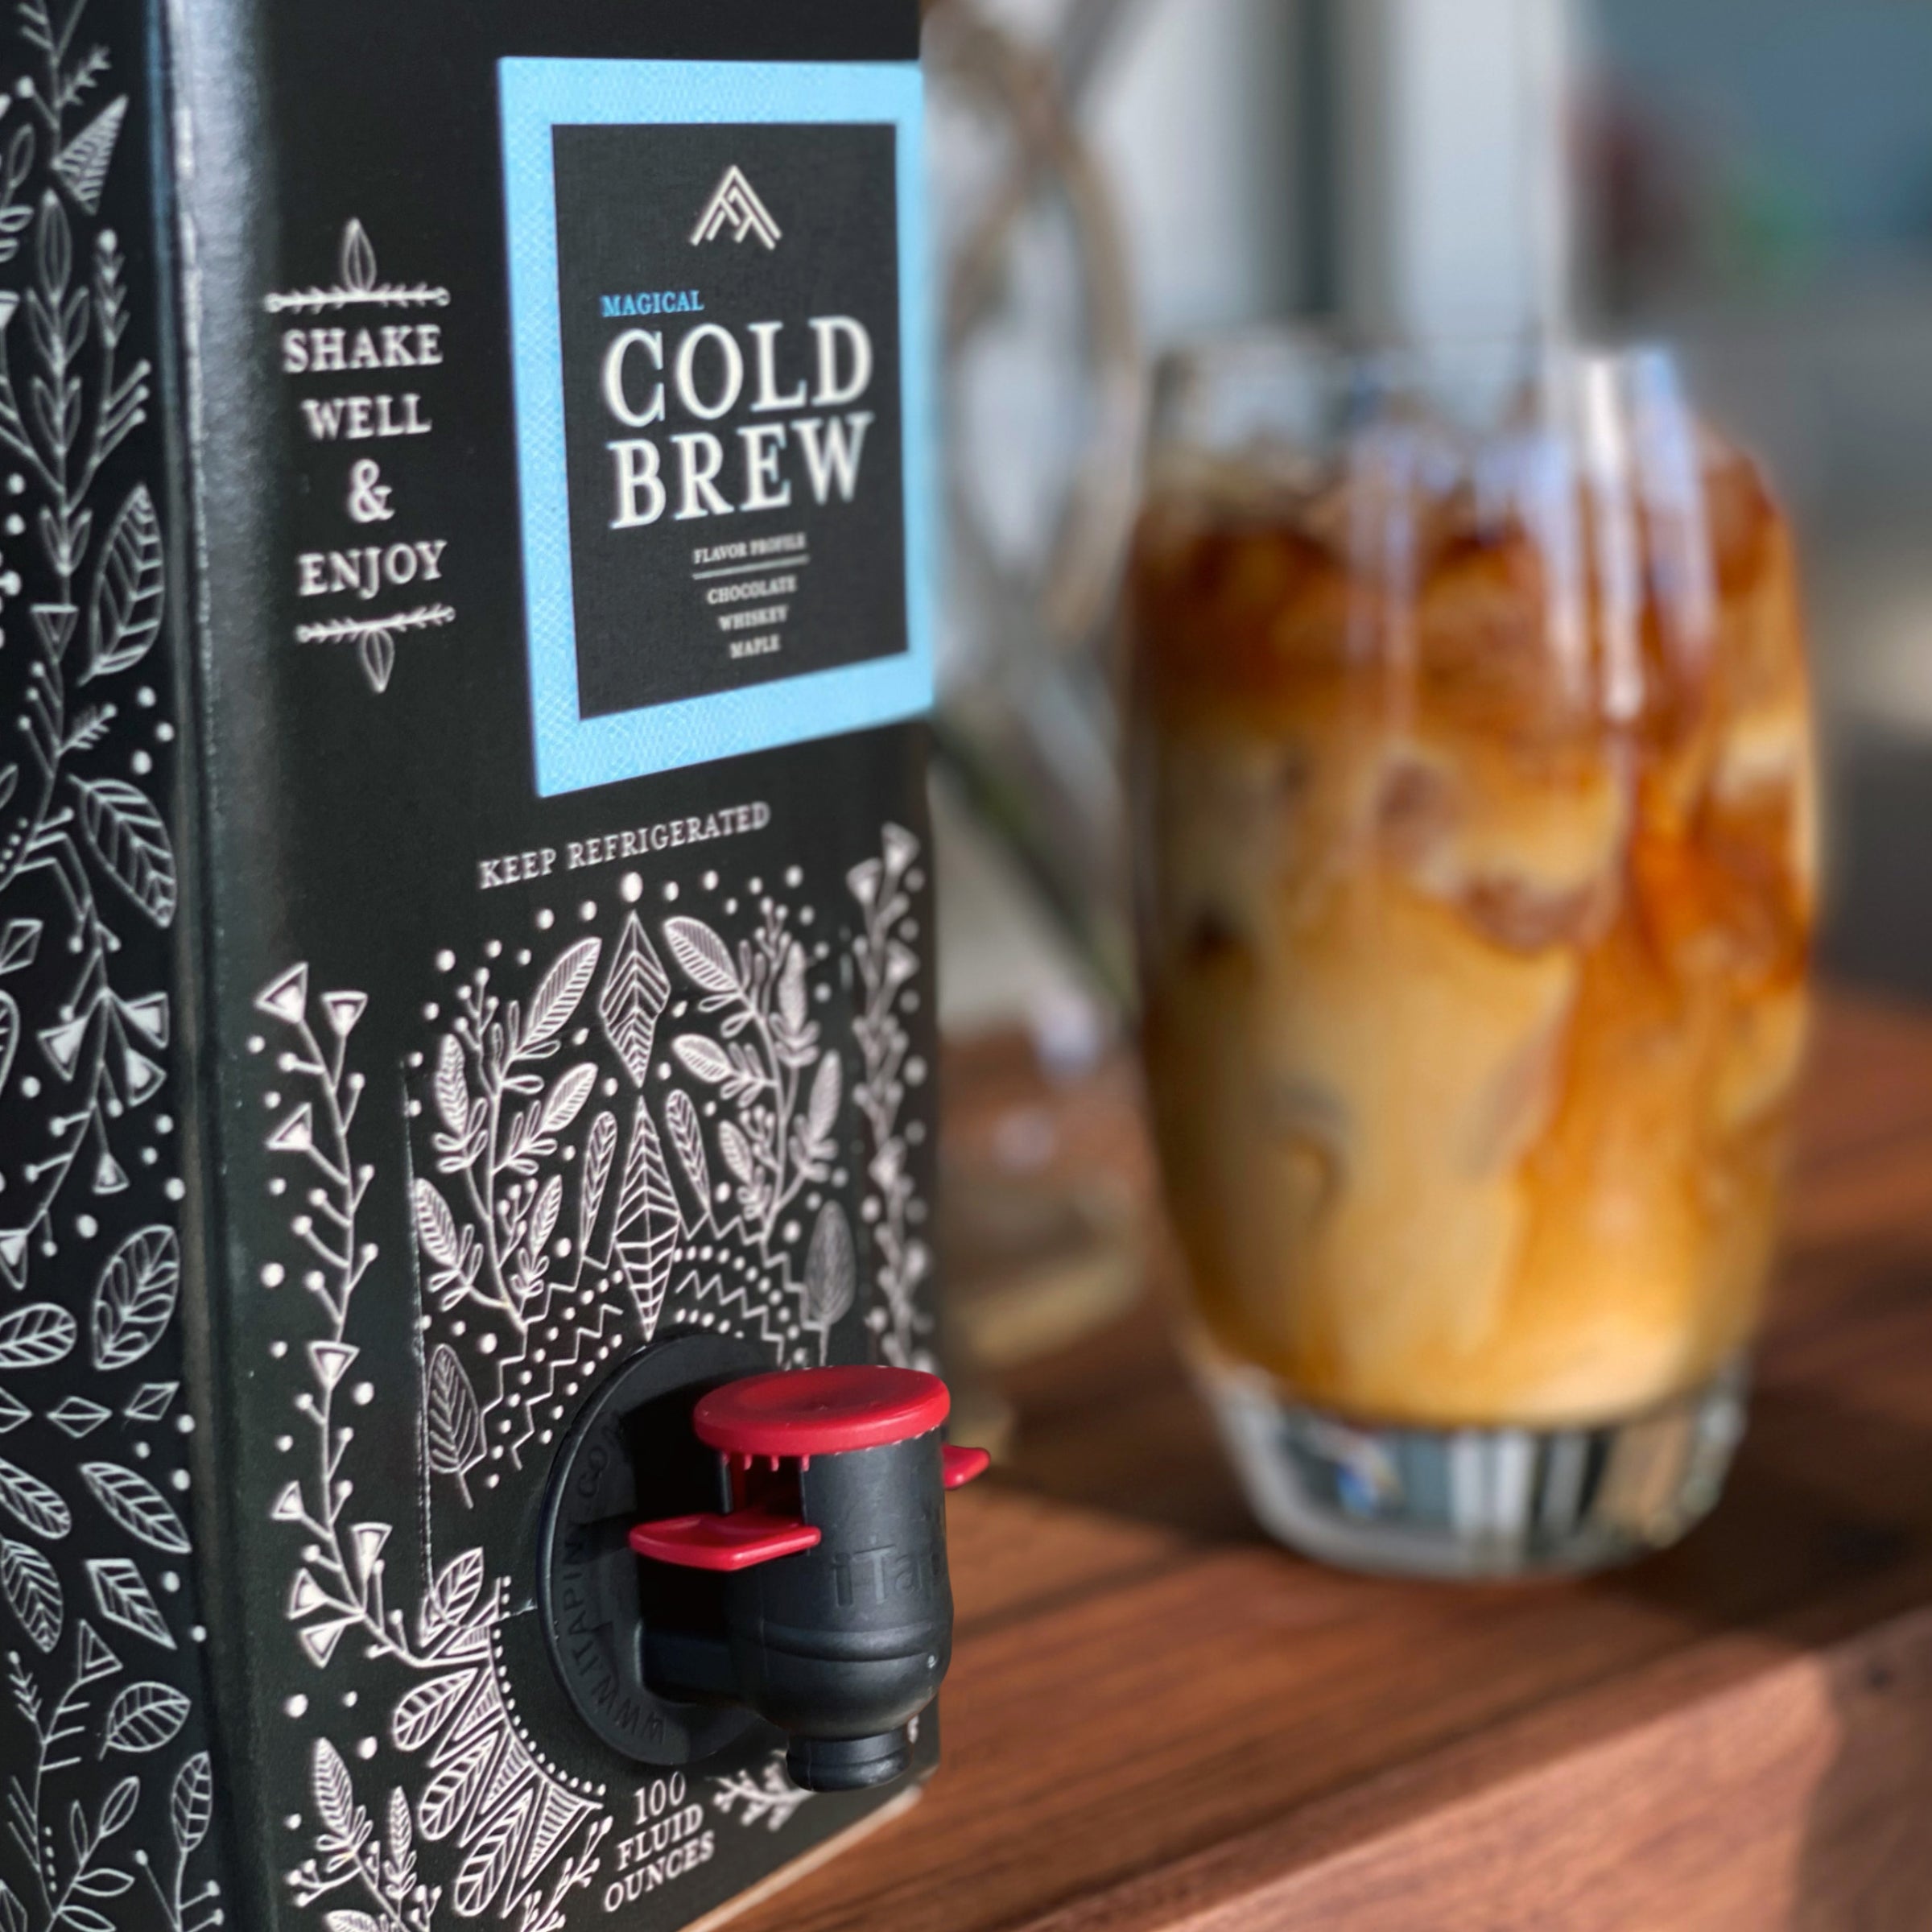 Afficionado Coffee Roasters Magical Cold Brew ready to drink beverage bag in box, like a box of wine, but with cold brew